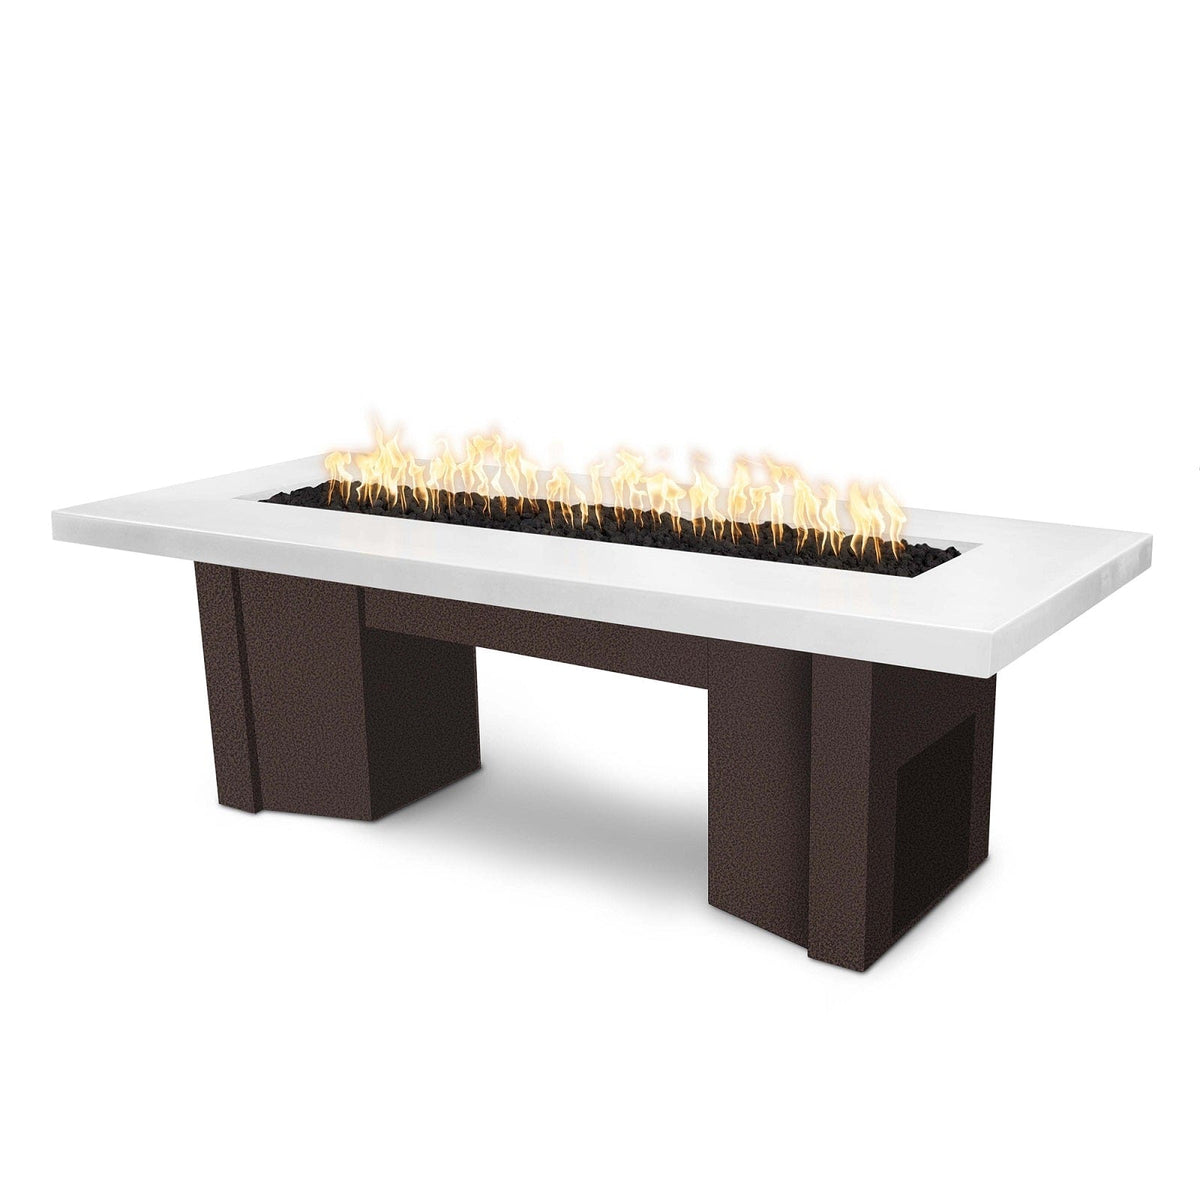 The Outdoor Plus Fire Features Limestone (-LIM) / Copper Vein Powder Coated Steel (-CPV) The Outdoor Plus 78&quot; Alameda Fire Table Smooth Concrete in Natural Gas - Match Lit / OPT-ALMGFRC78-NG